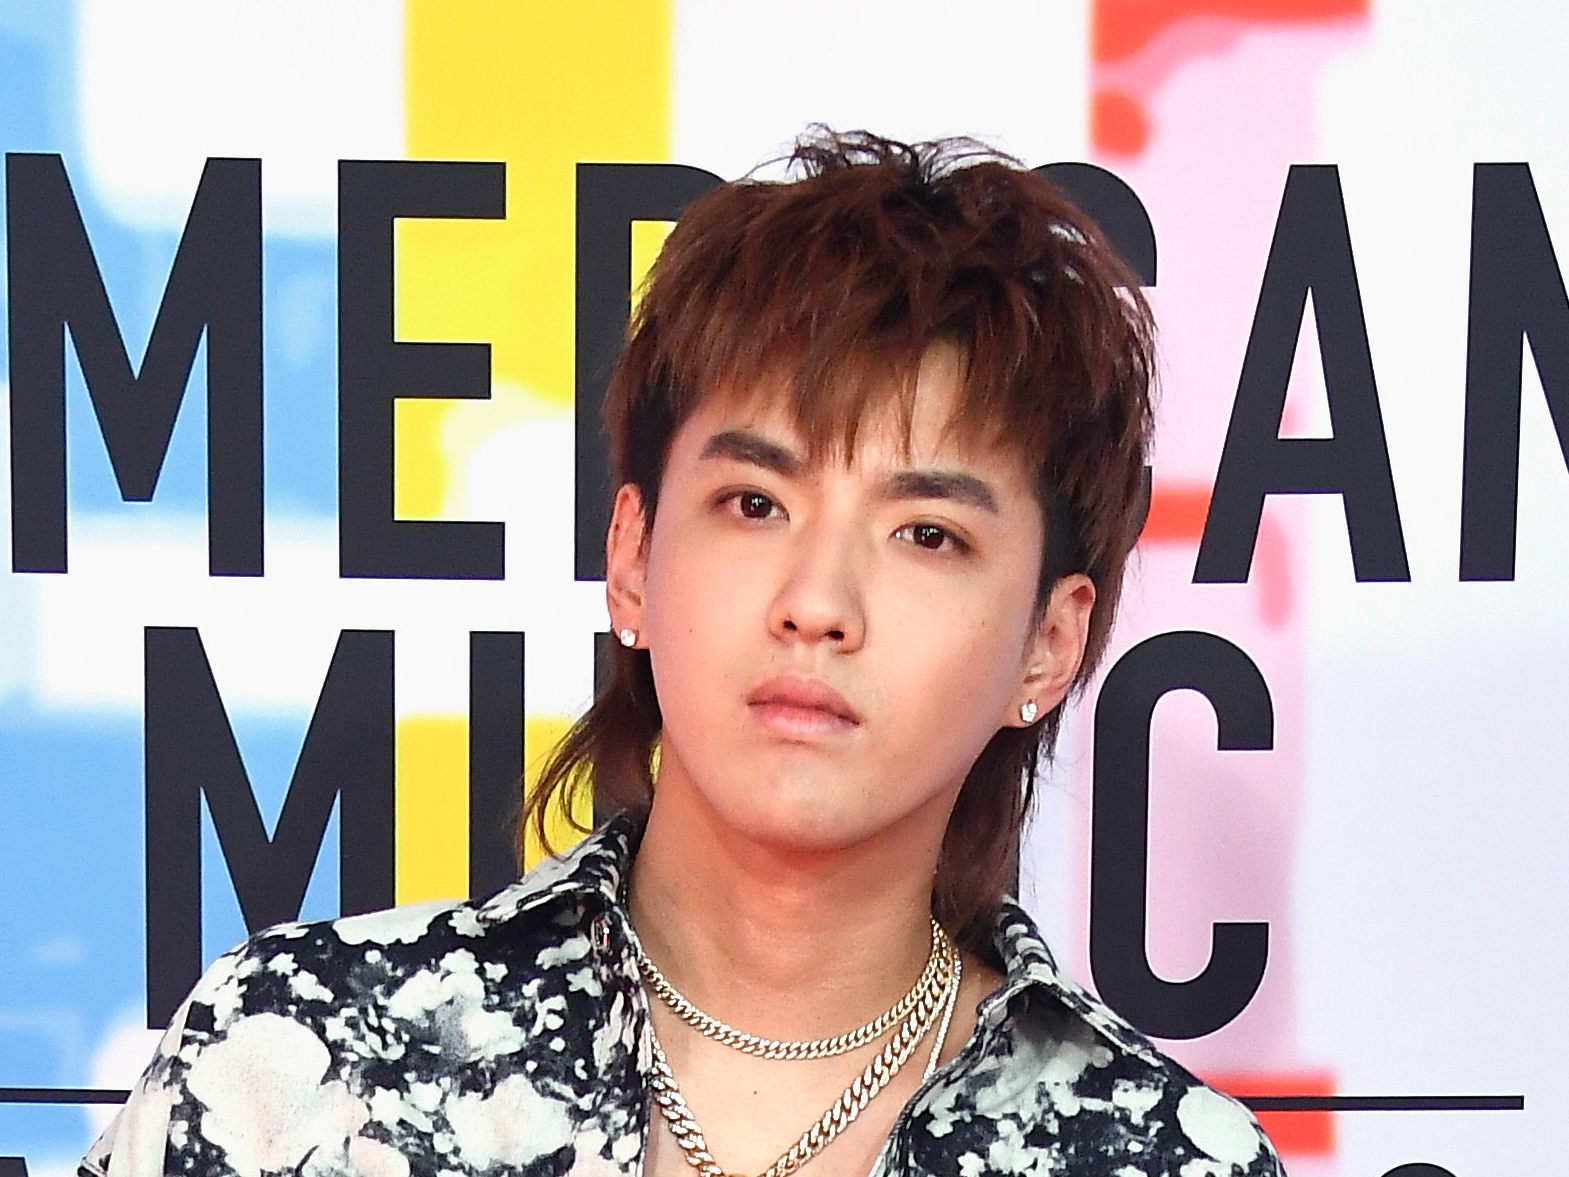 Chinese Pop Star Kris Wu Dumped by Porsche, Bulgari After Sex Accusation image